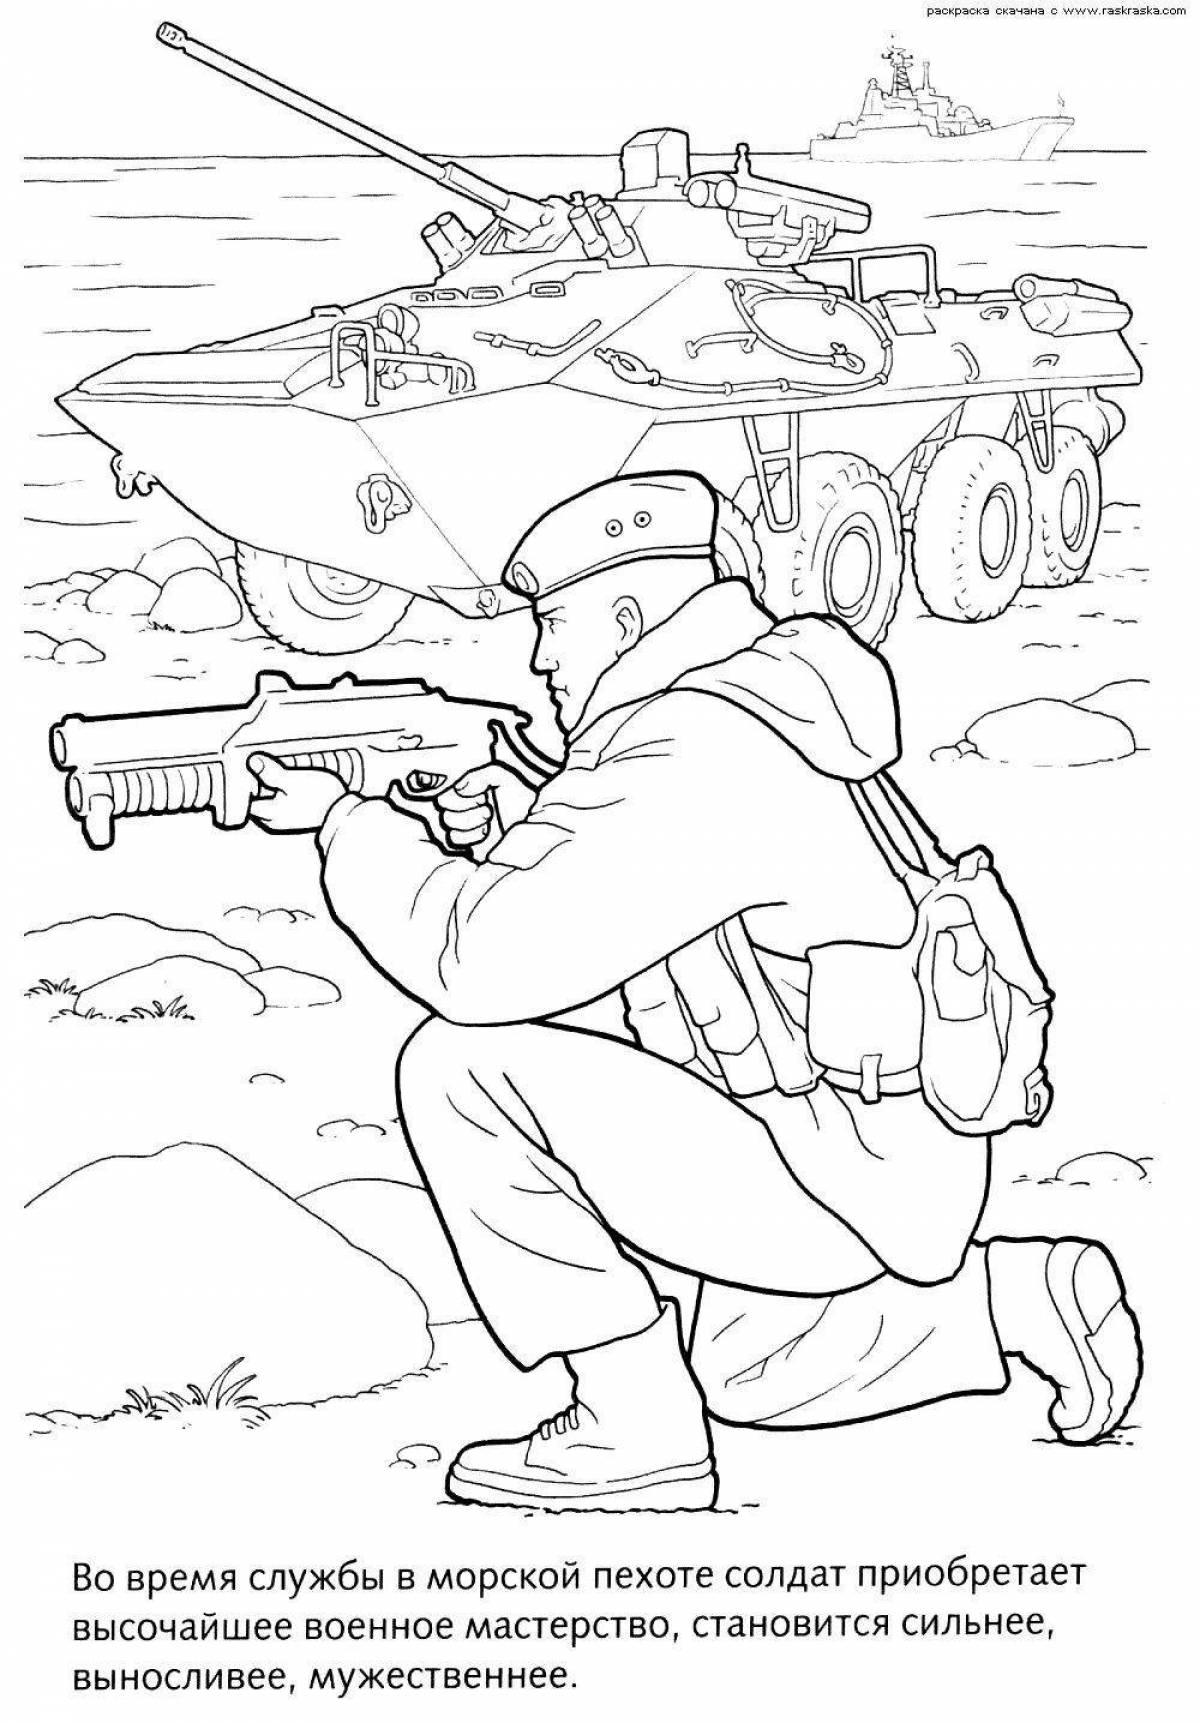 Colorful russian soldier coloring page